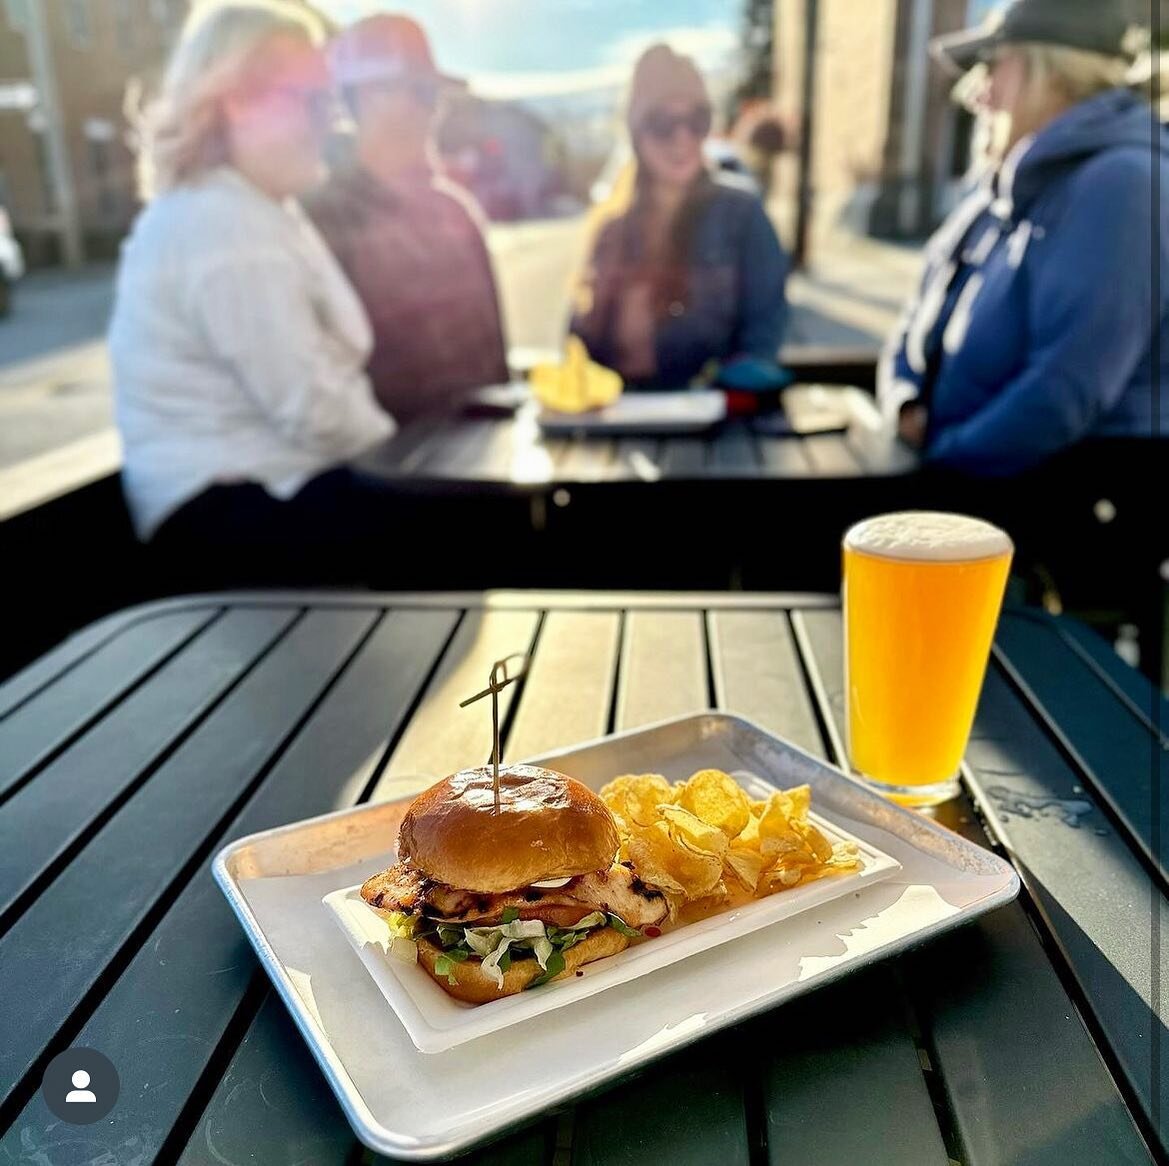 Head over to the @sunflower.kitchen.hendo at @oklawahabrewing where the beer is flowing and we&rsquo;re cooking up some fresh &amp; delicious comfort food for these chilly days 🙌

#oklawahabrewingcompany #hendersonvillenc #sunflowerkitchen